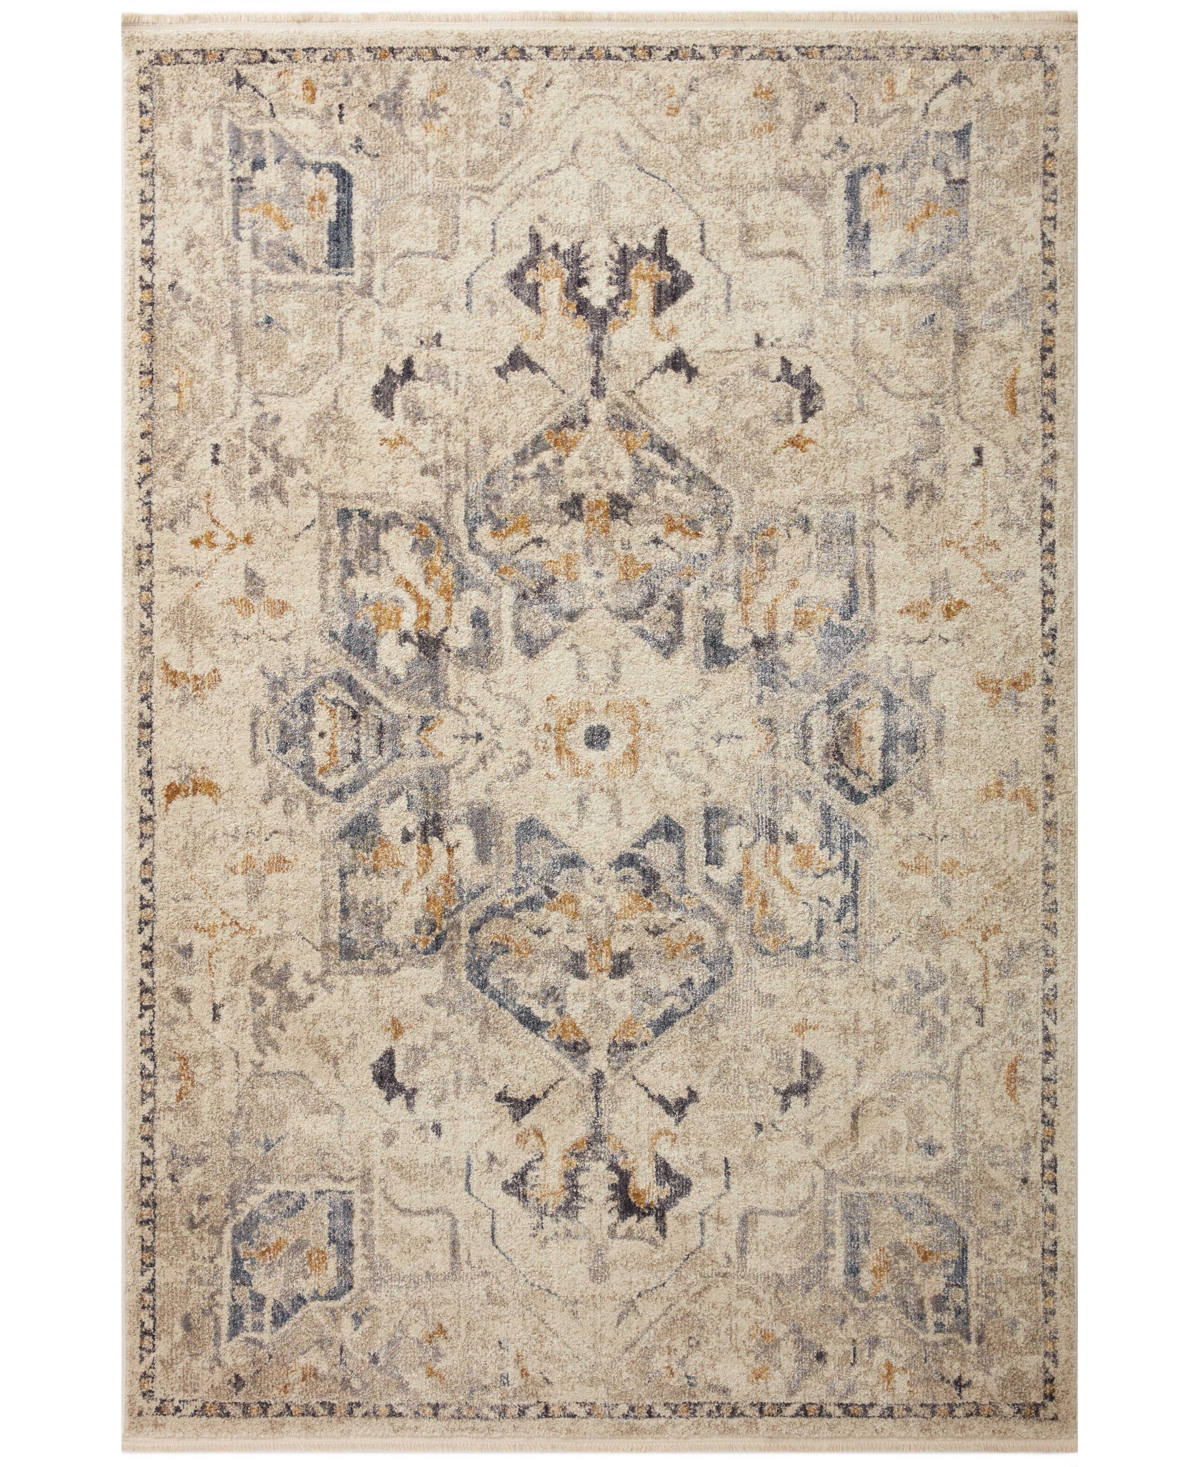 Magnolia Home By Joanna Gaines X Loloi Janey Jay-01 7'10" X 10'10" Area Rug In Beige